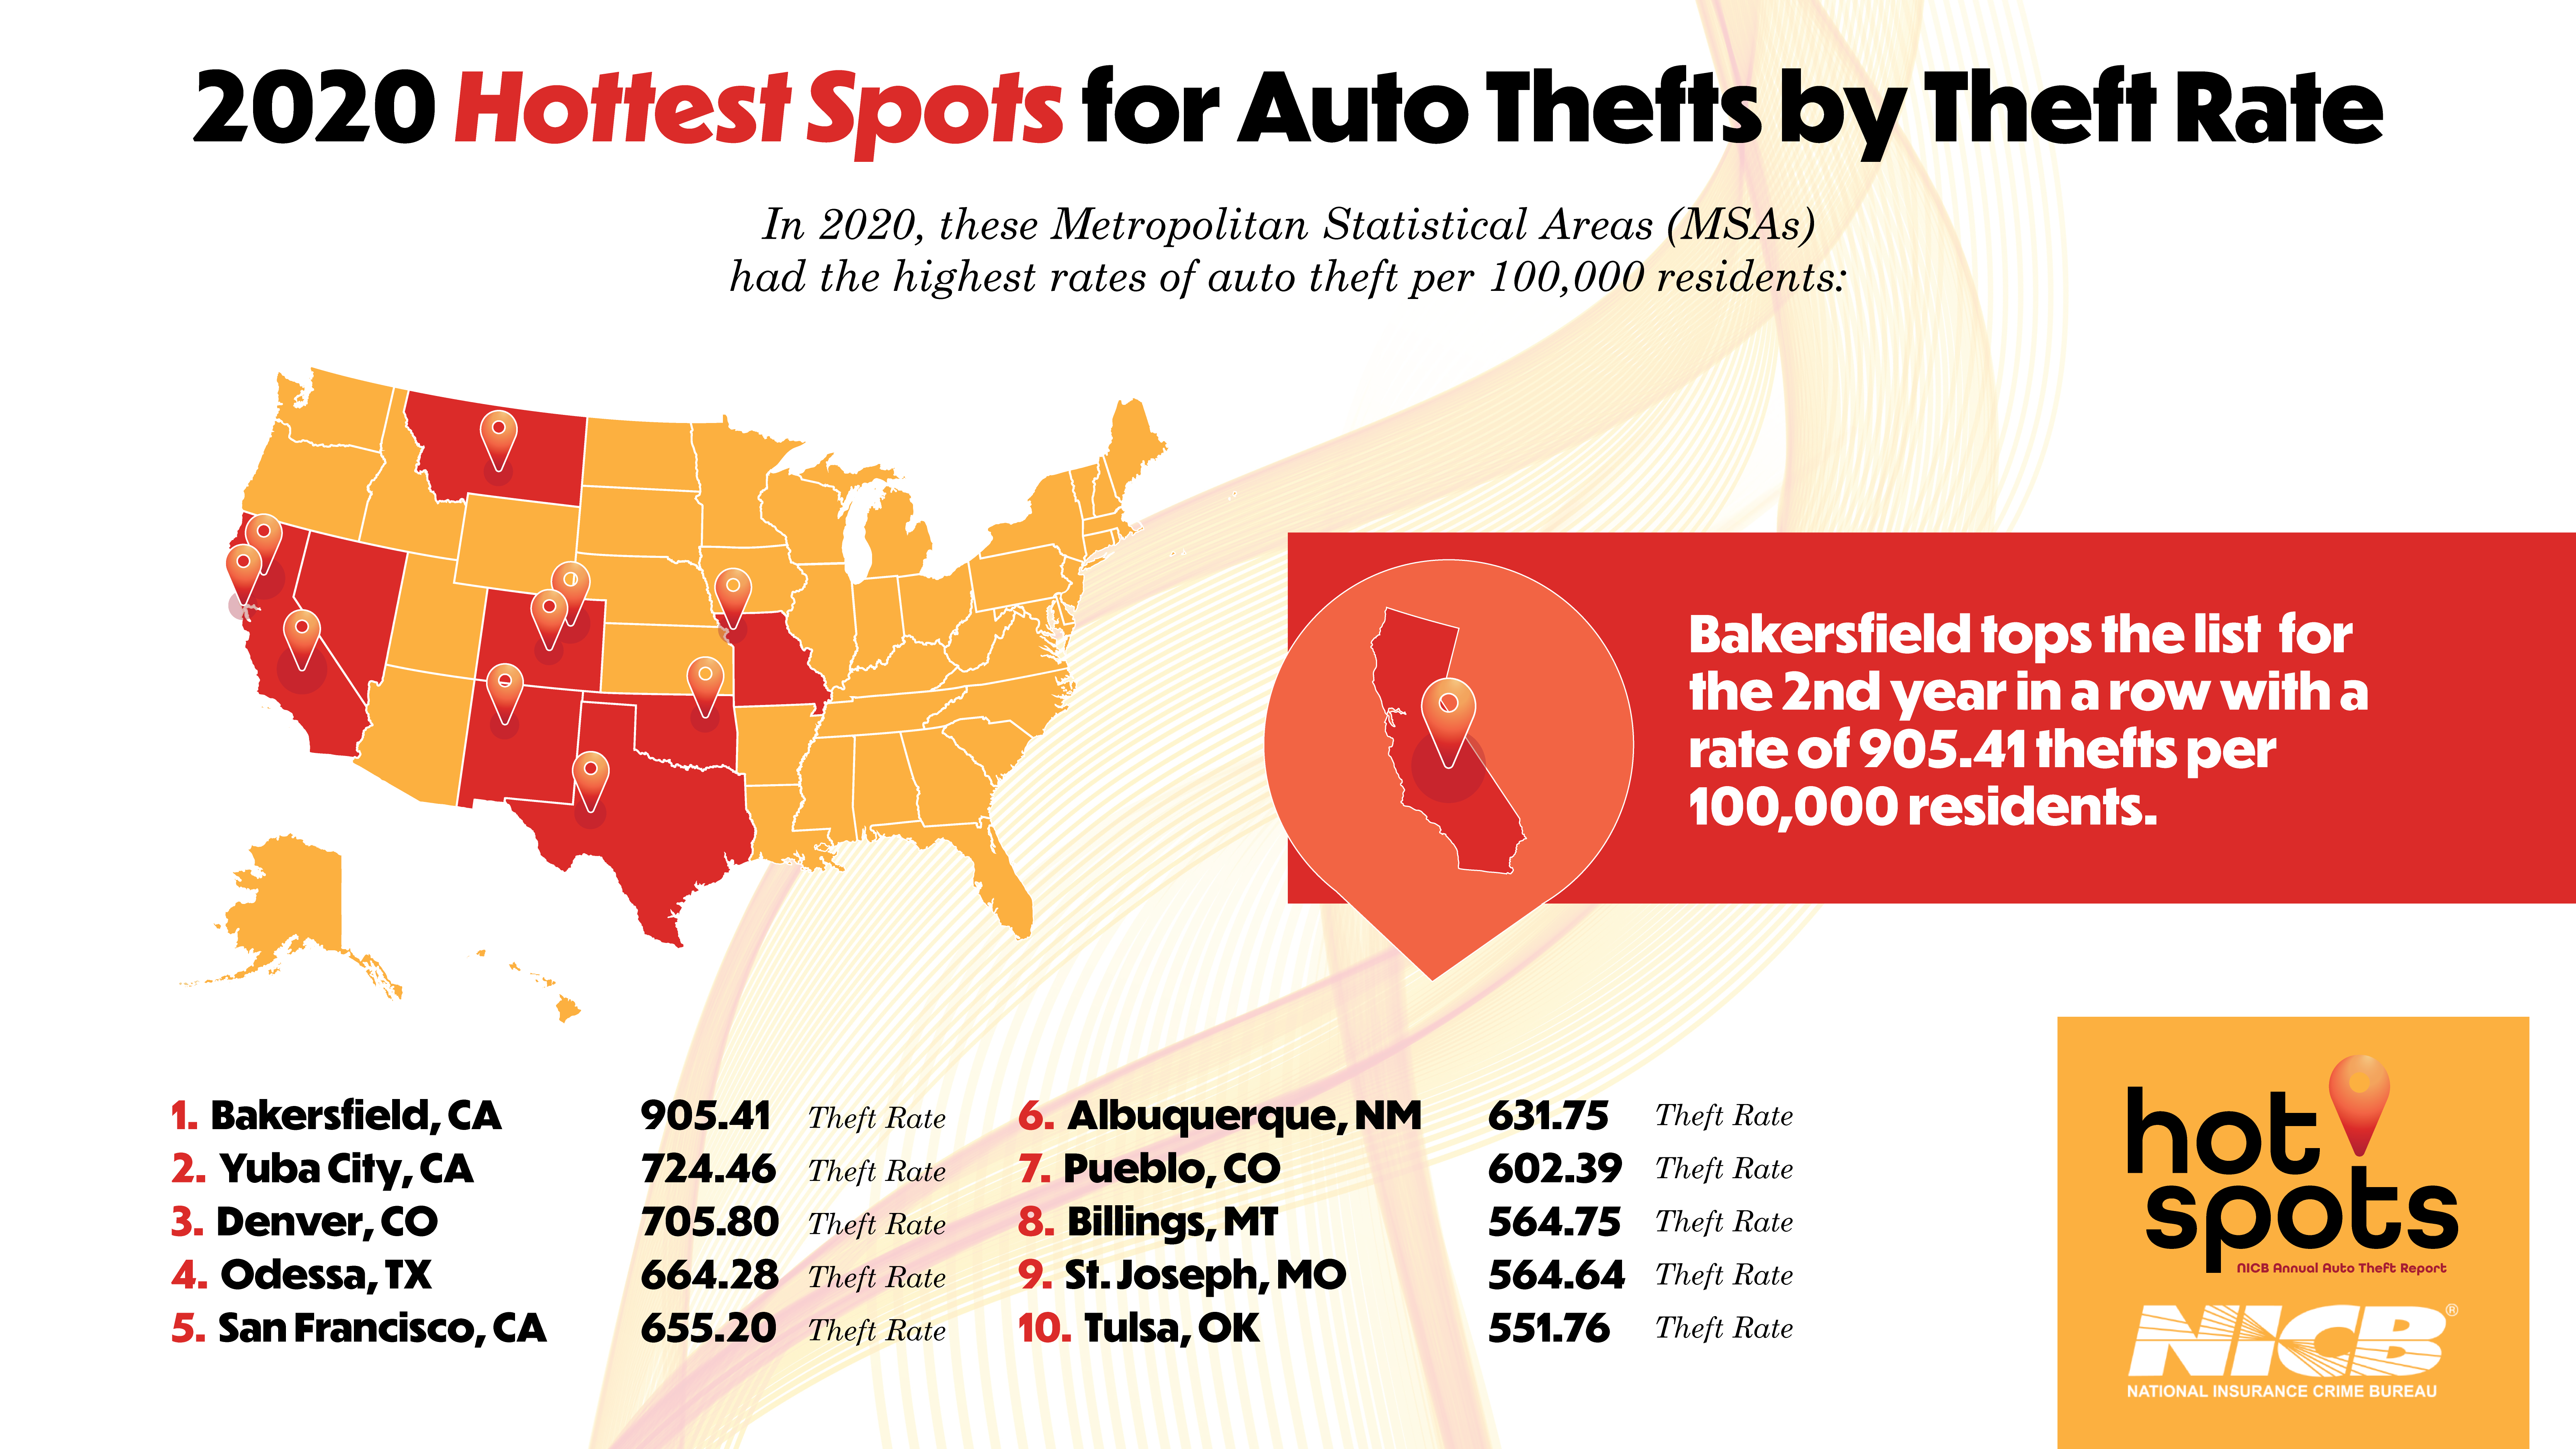 Hot Spots by Theft Rate